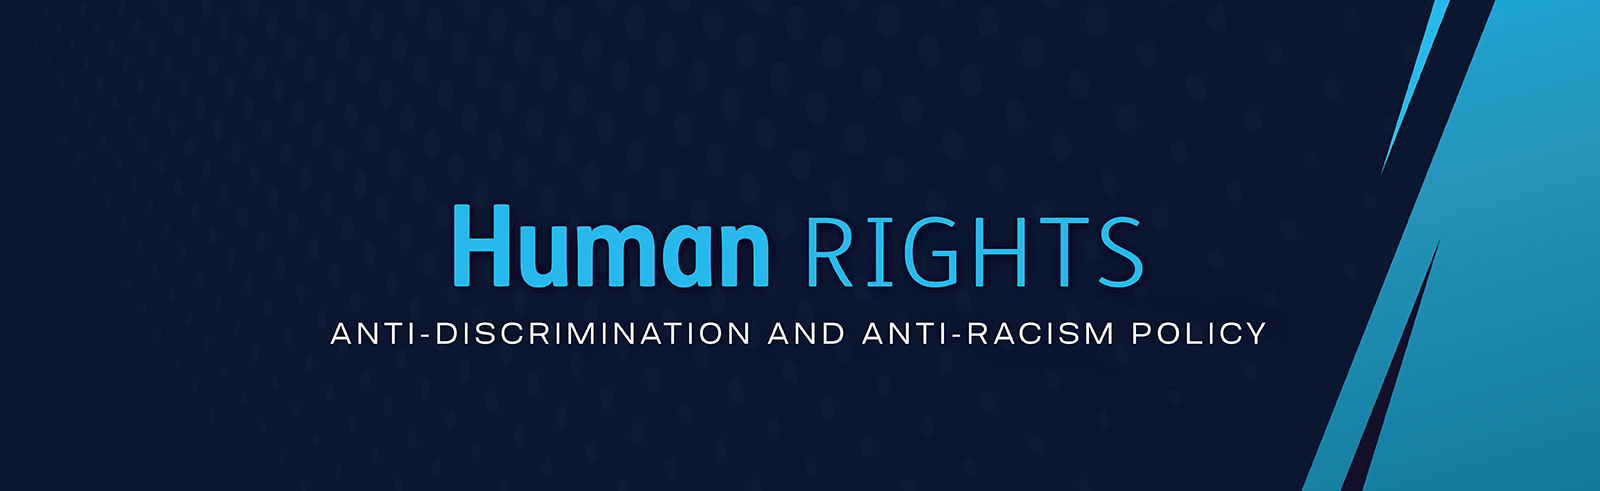 Human Rights, Anti-Discrimination and Anti-Racism Policy